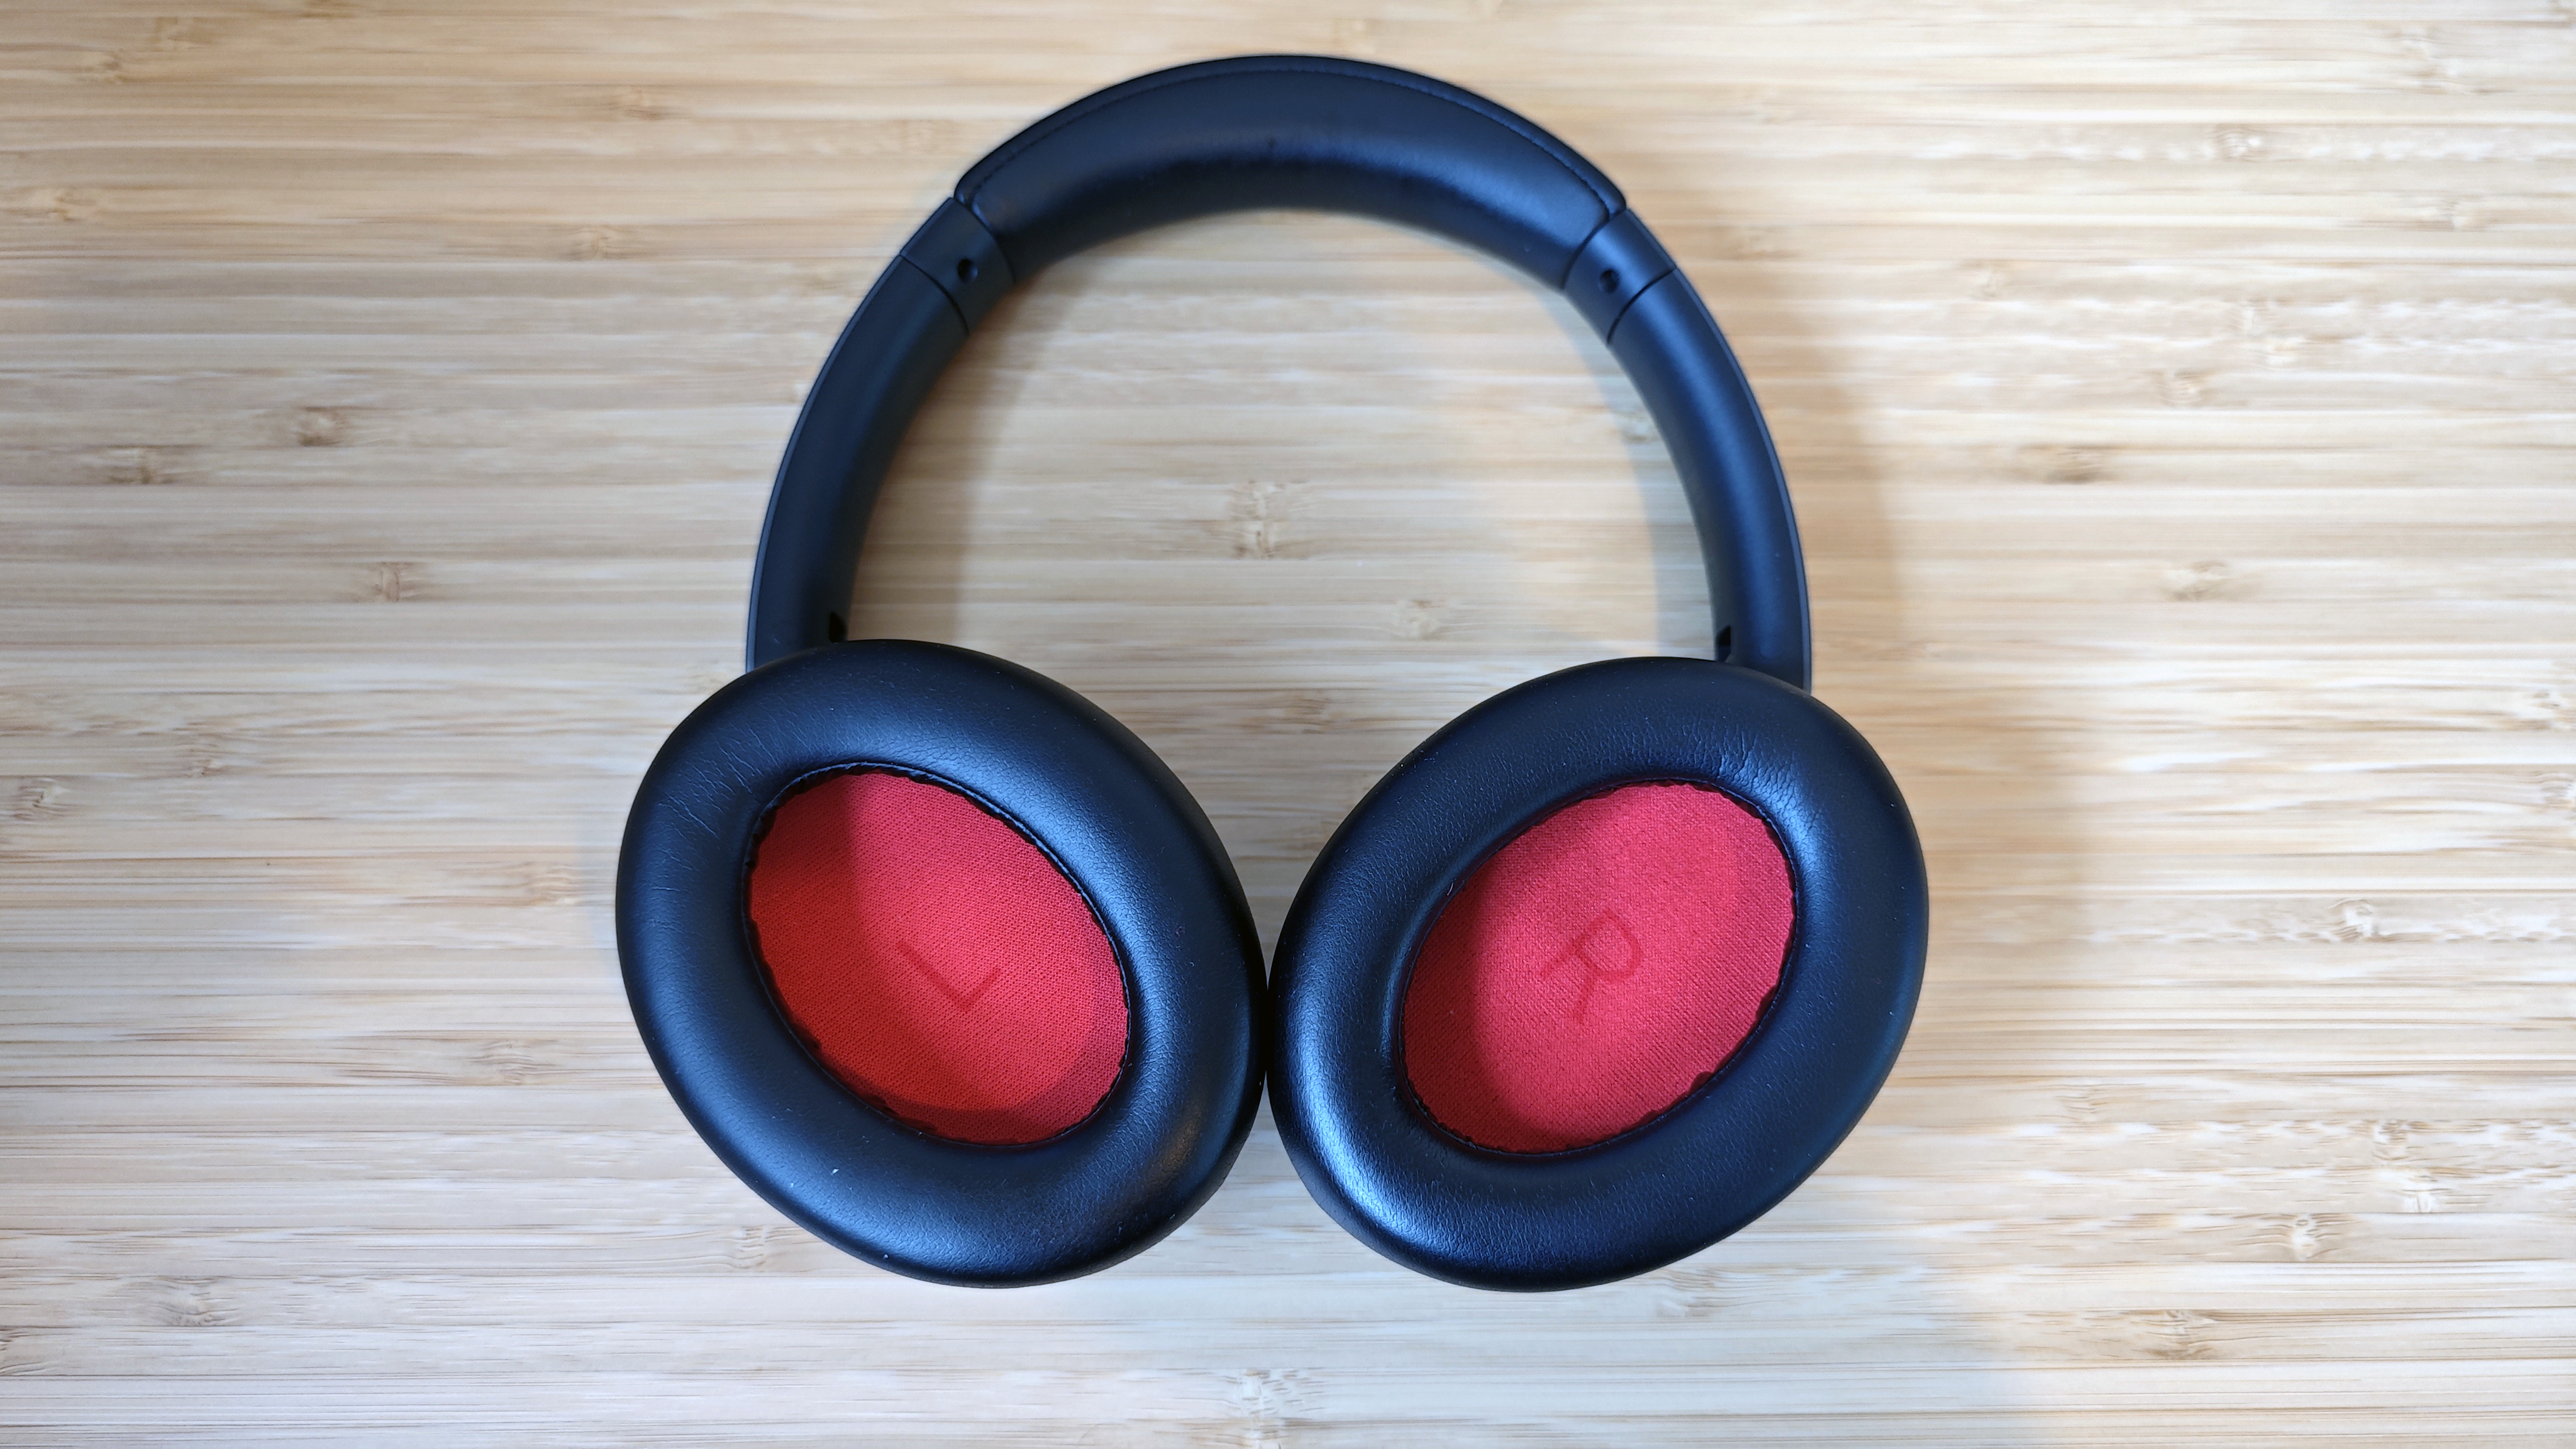 $80 ANC headphones tested - 1MORE SonoFlow Review 